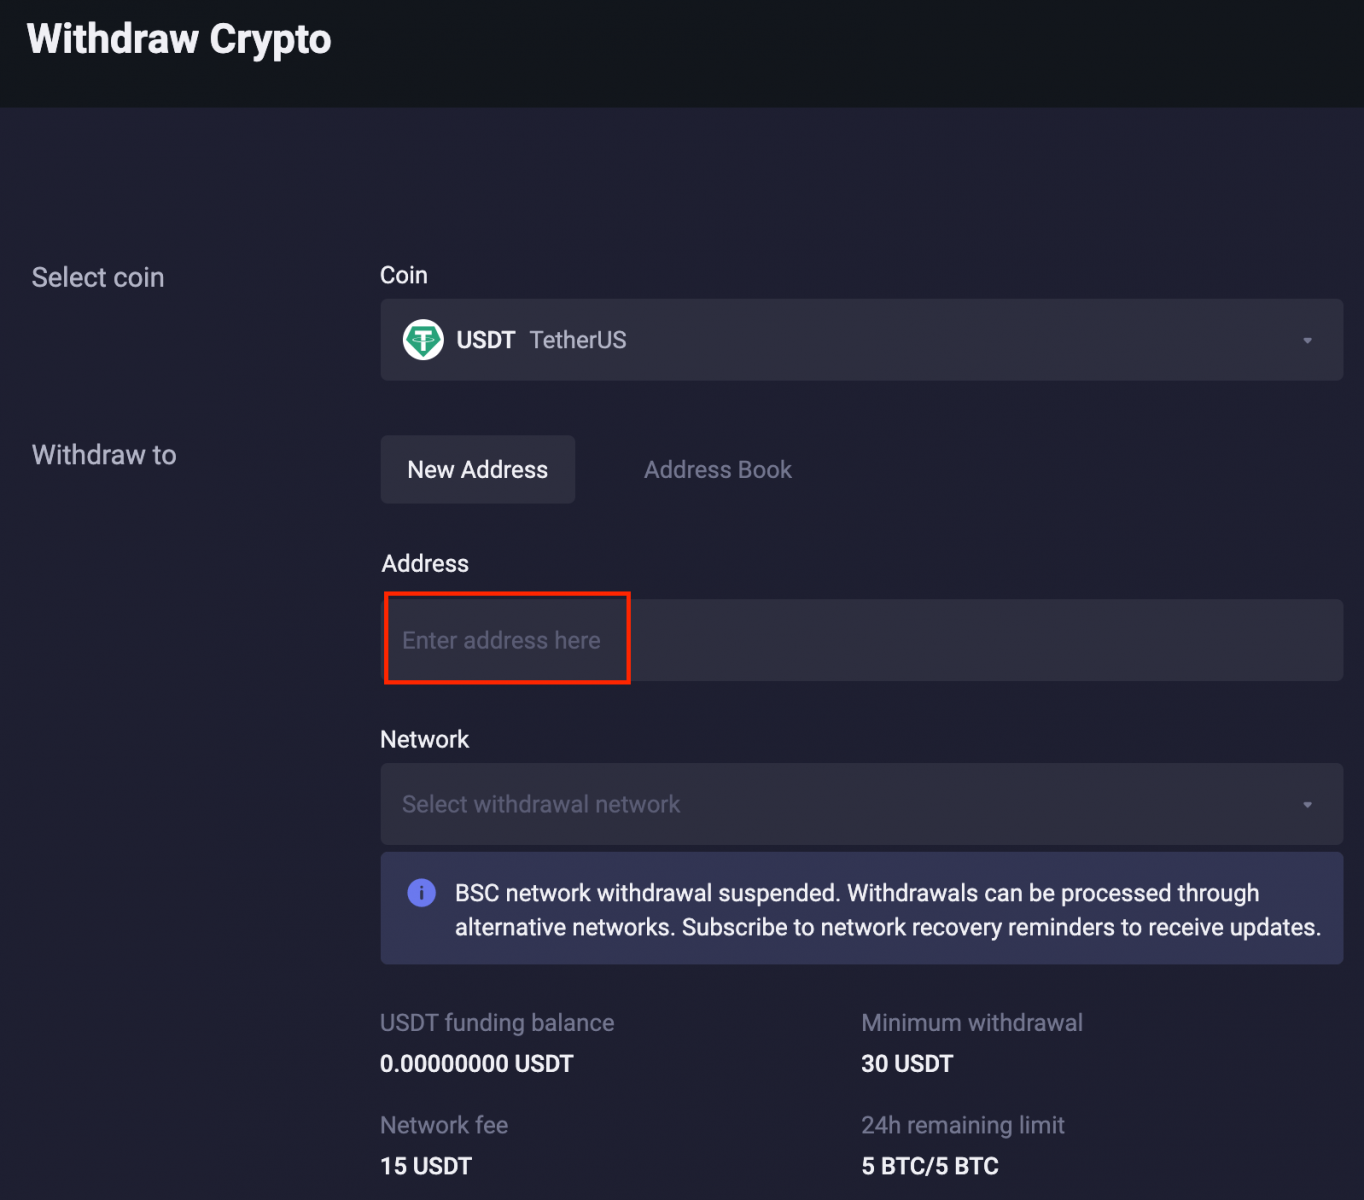 How to Trade Crypto and Withdraw from ApolloX